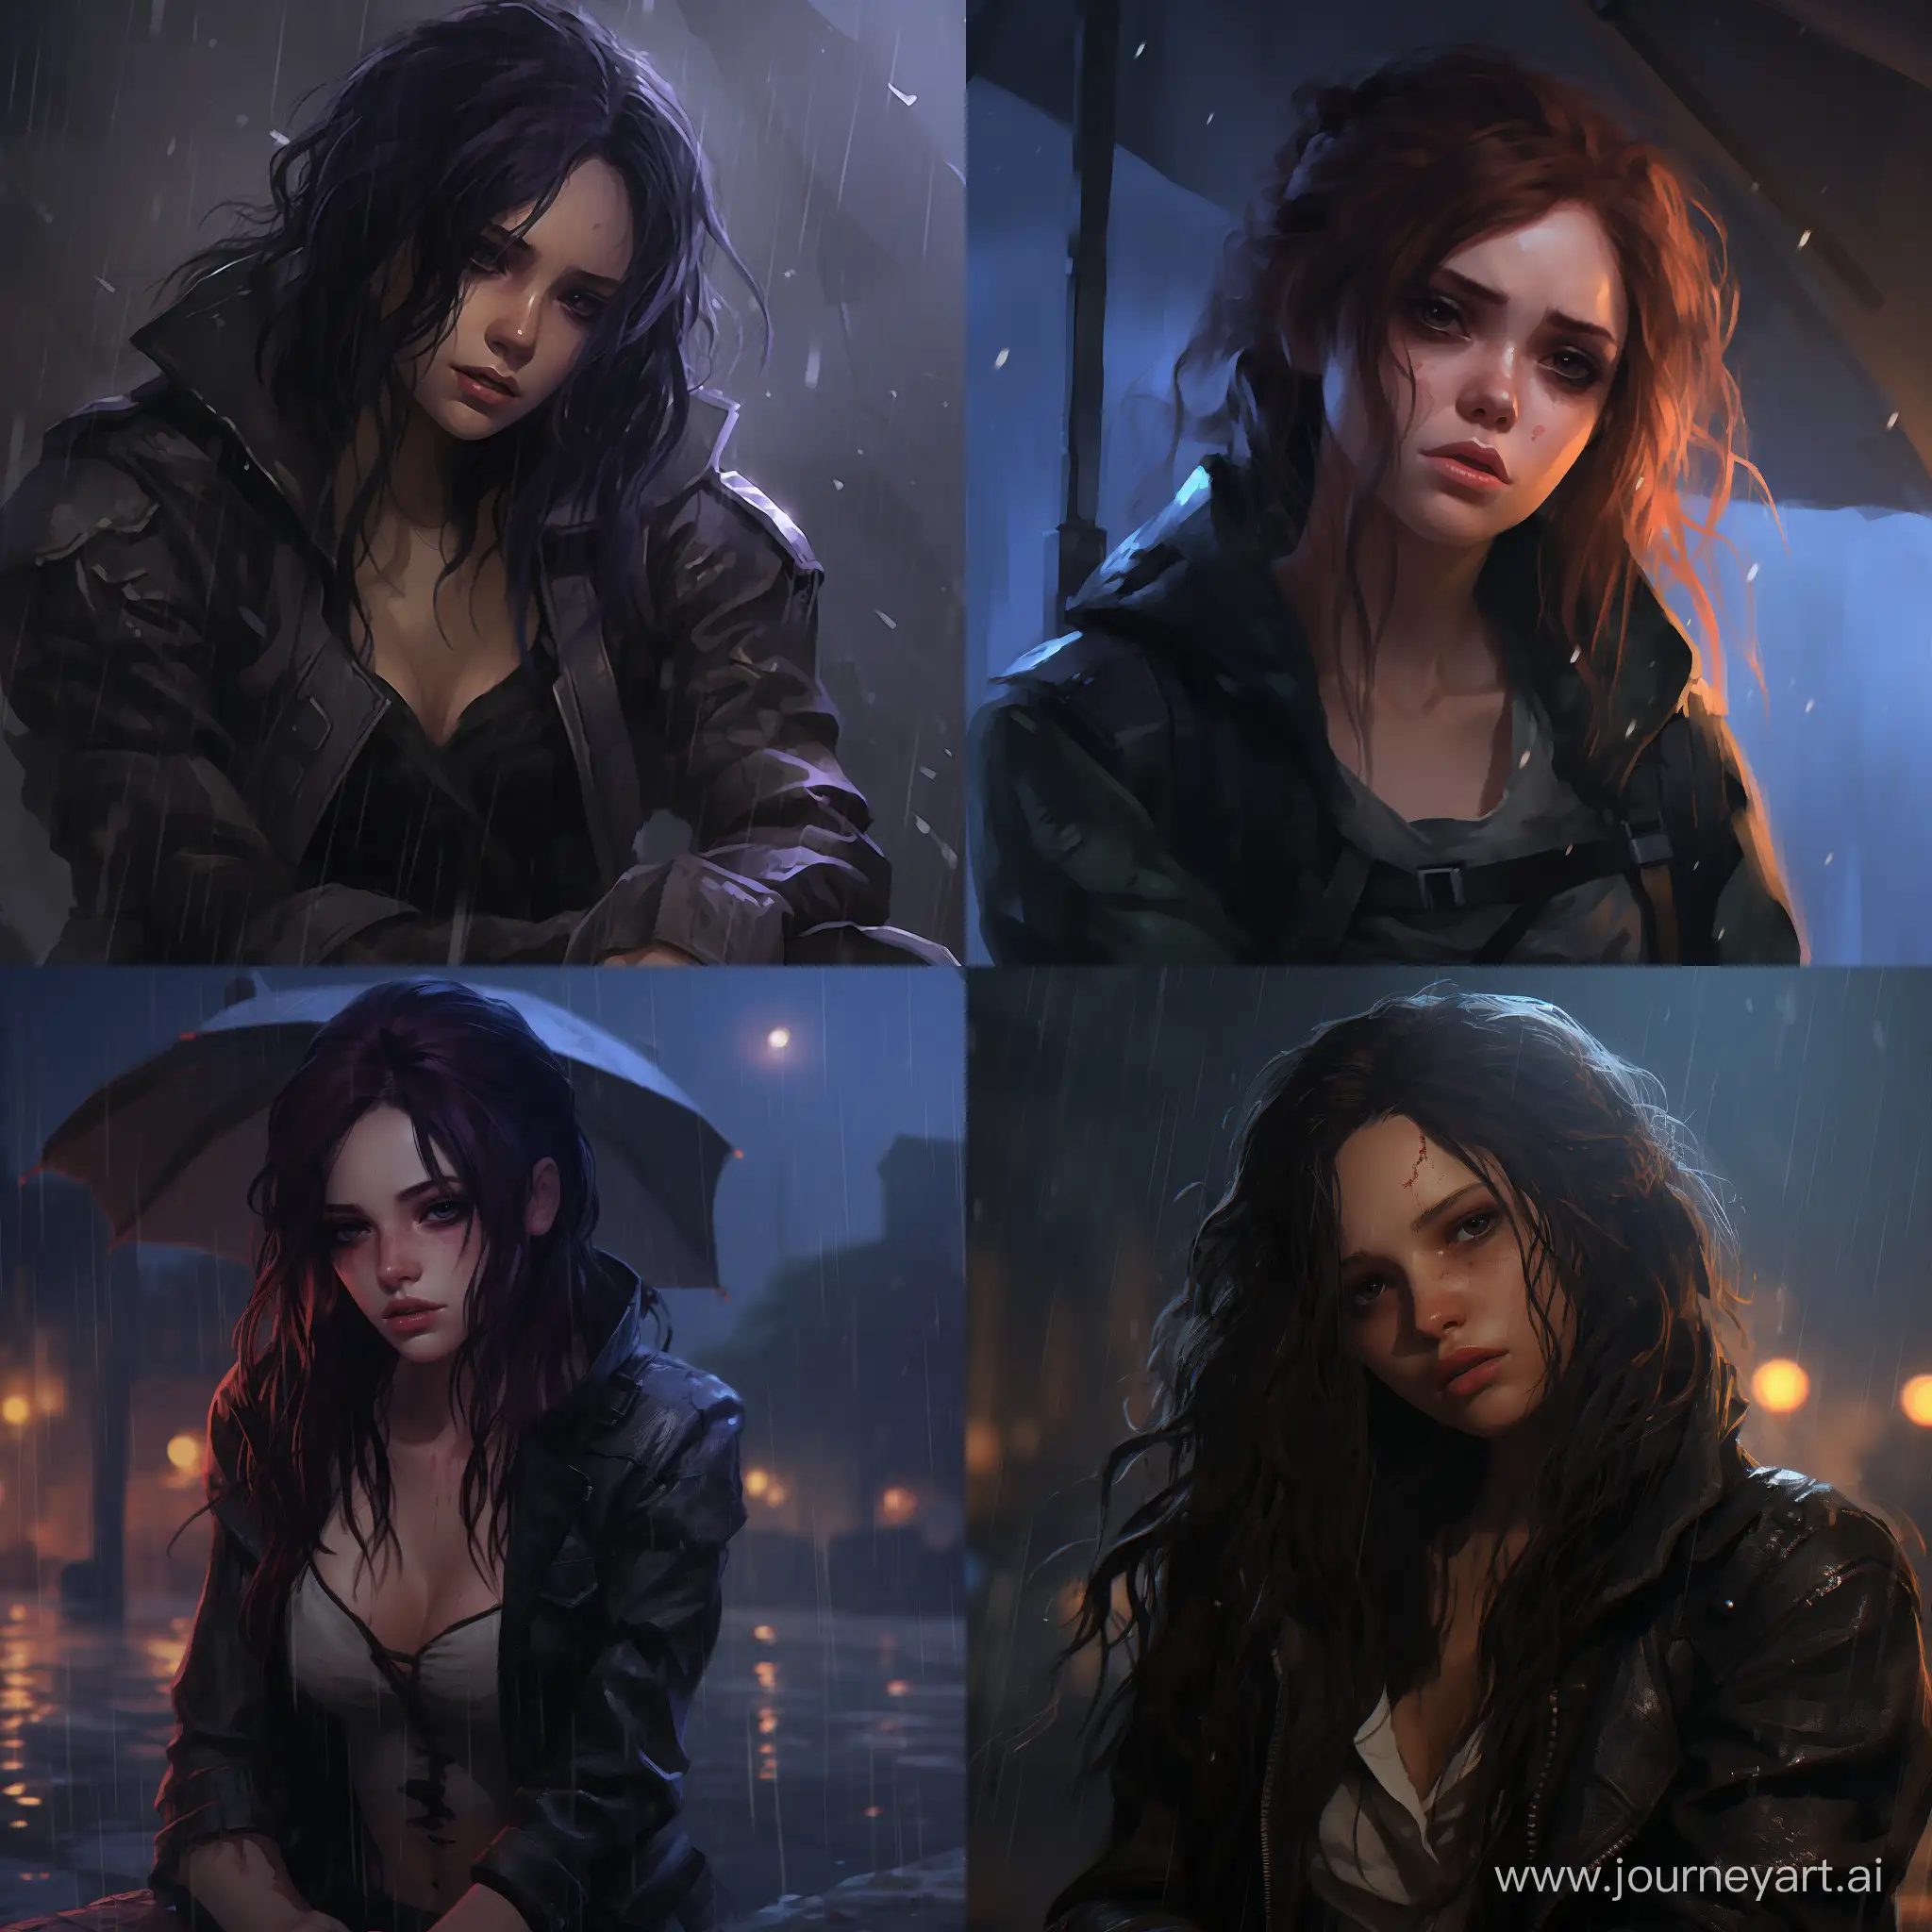 Caitlyn-from-League-of-Legends-Expresses-Profound-Sadness-in-the-Rain